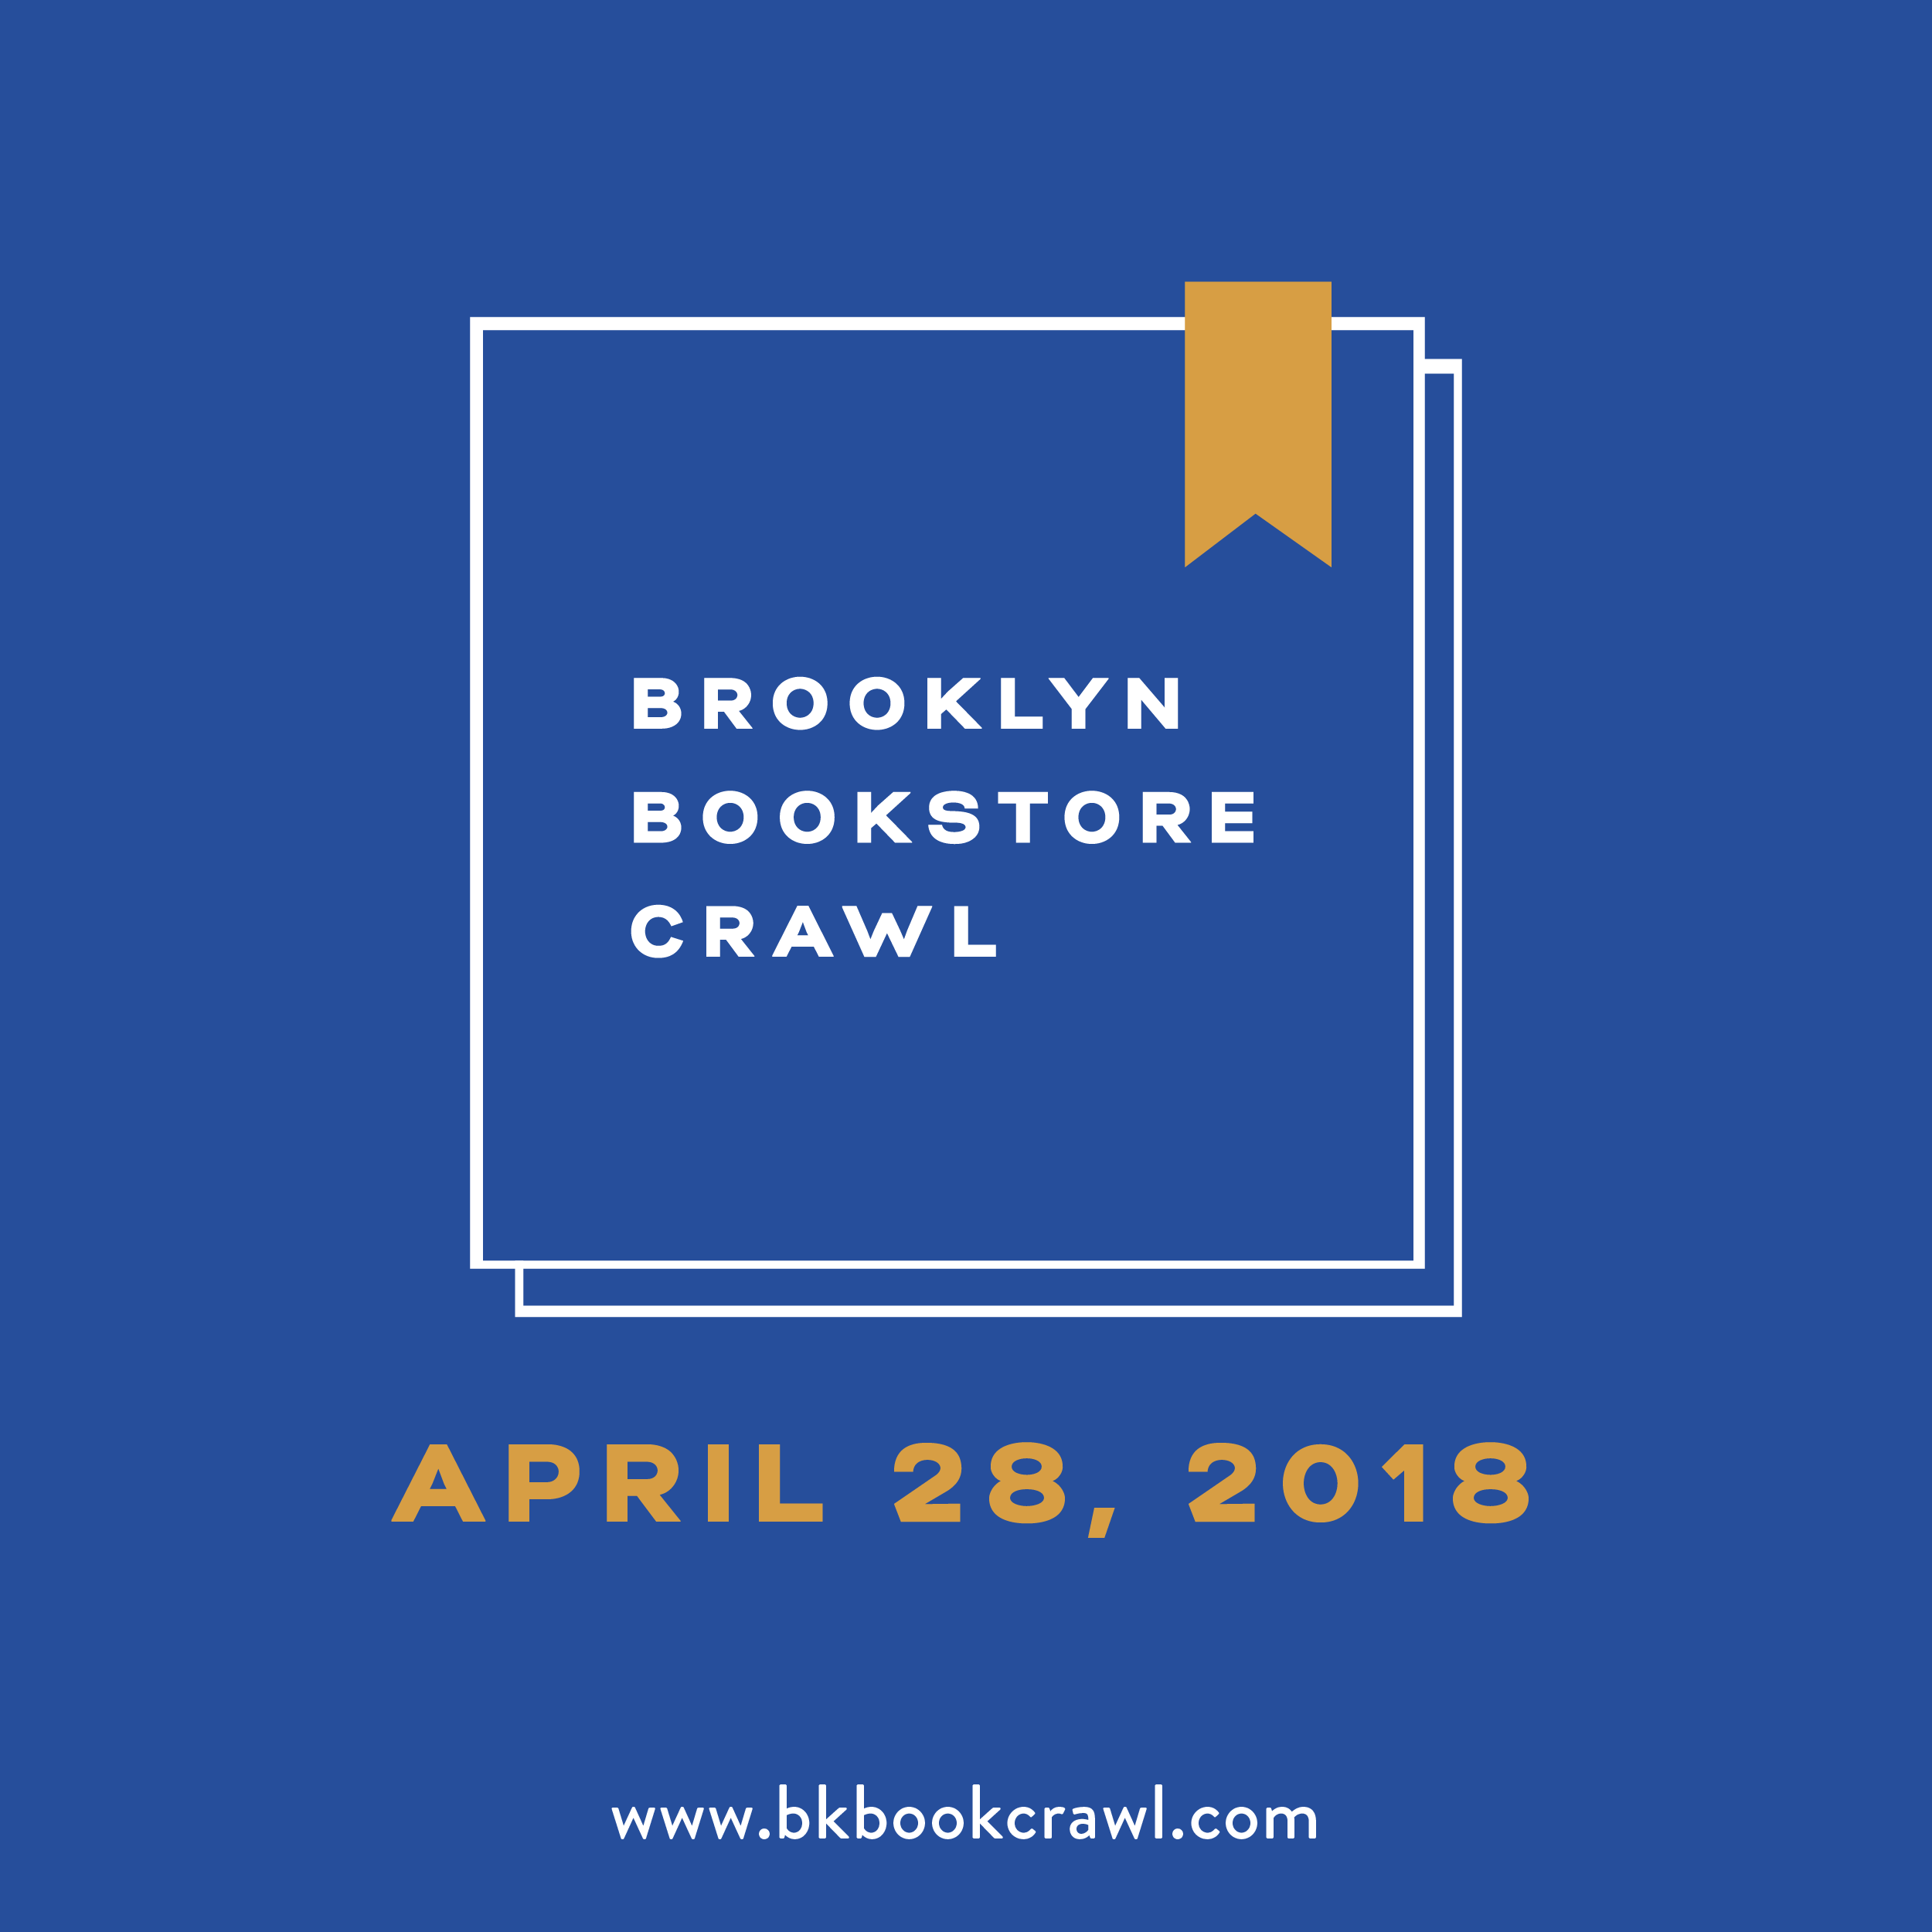 Brooklyn Bookstore Crawl Returns for Third Year on Indie Bookstore Day!